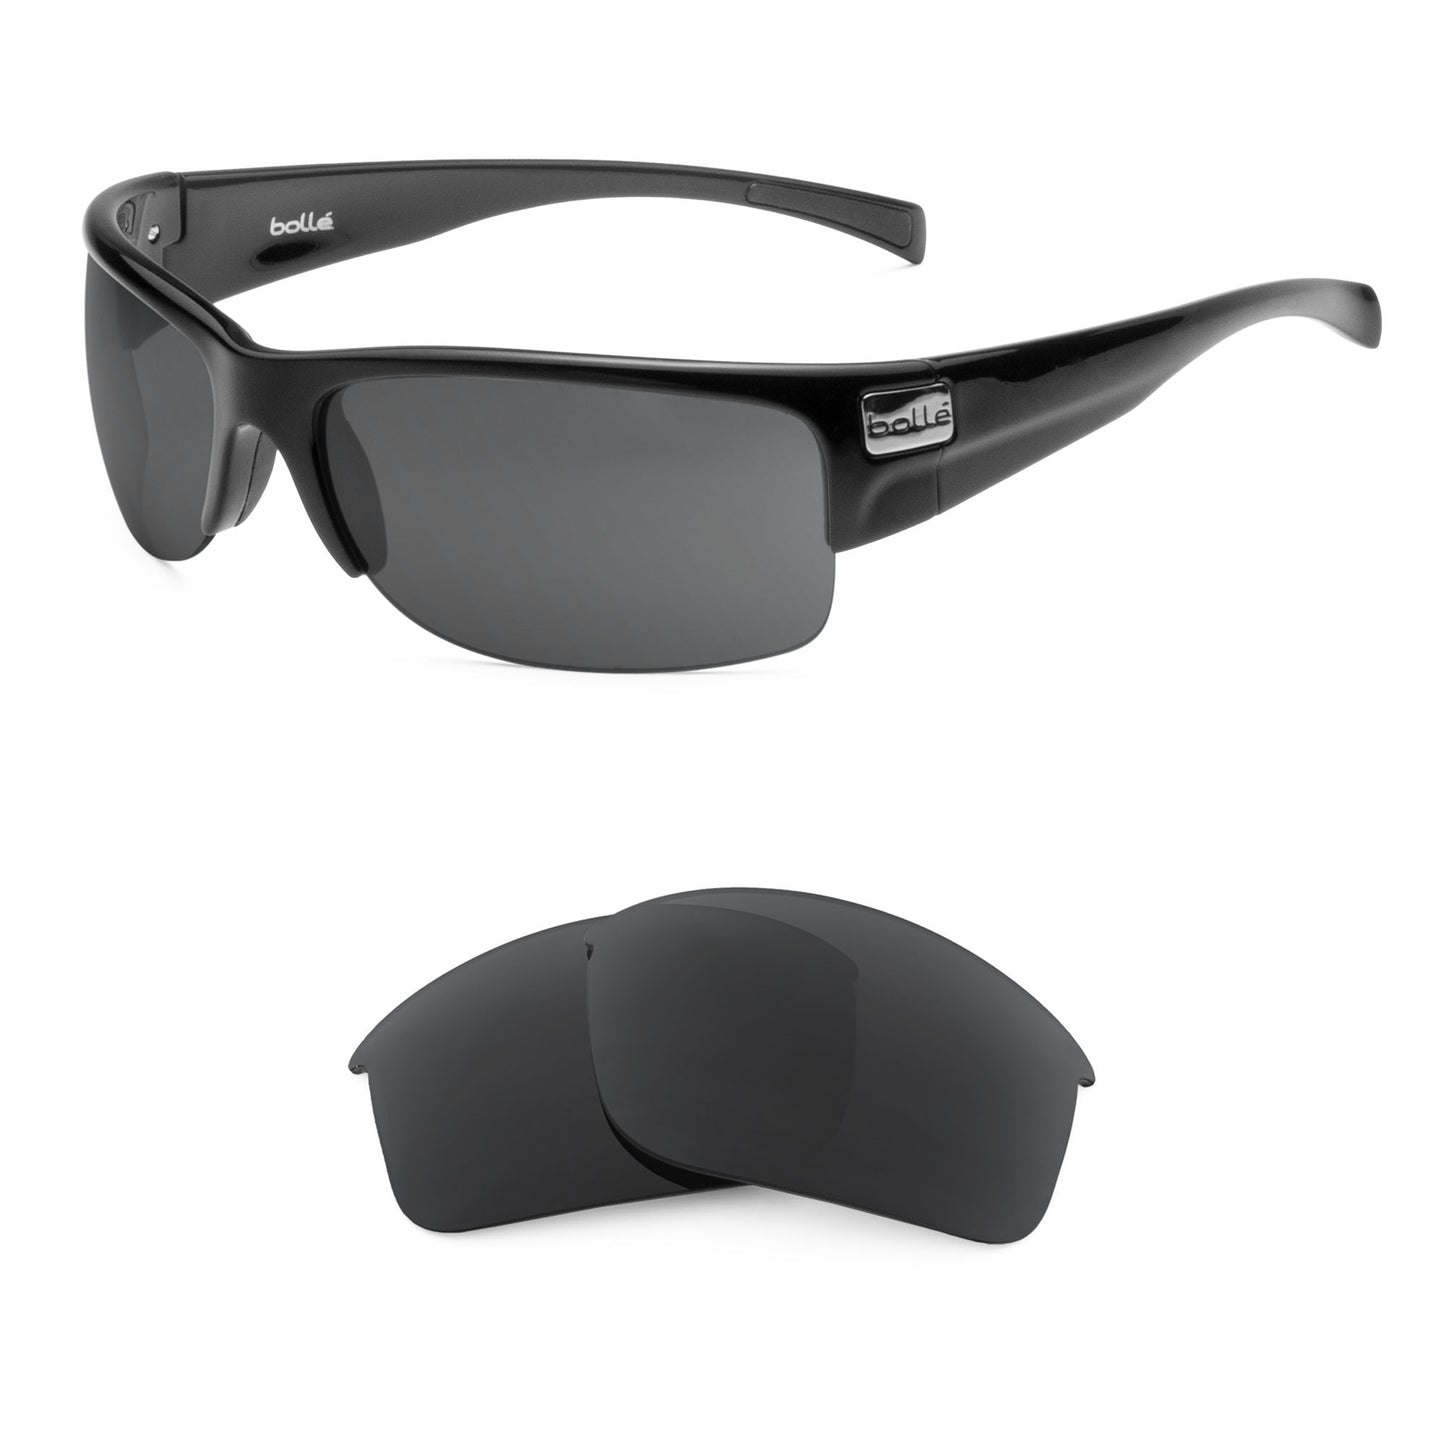 Bolle Zander sunglasses with replacement lenses